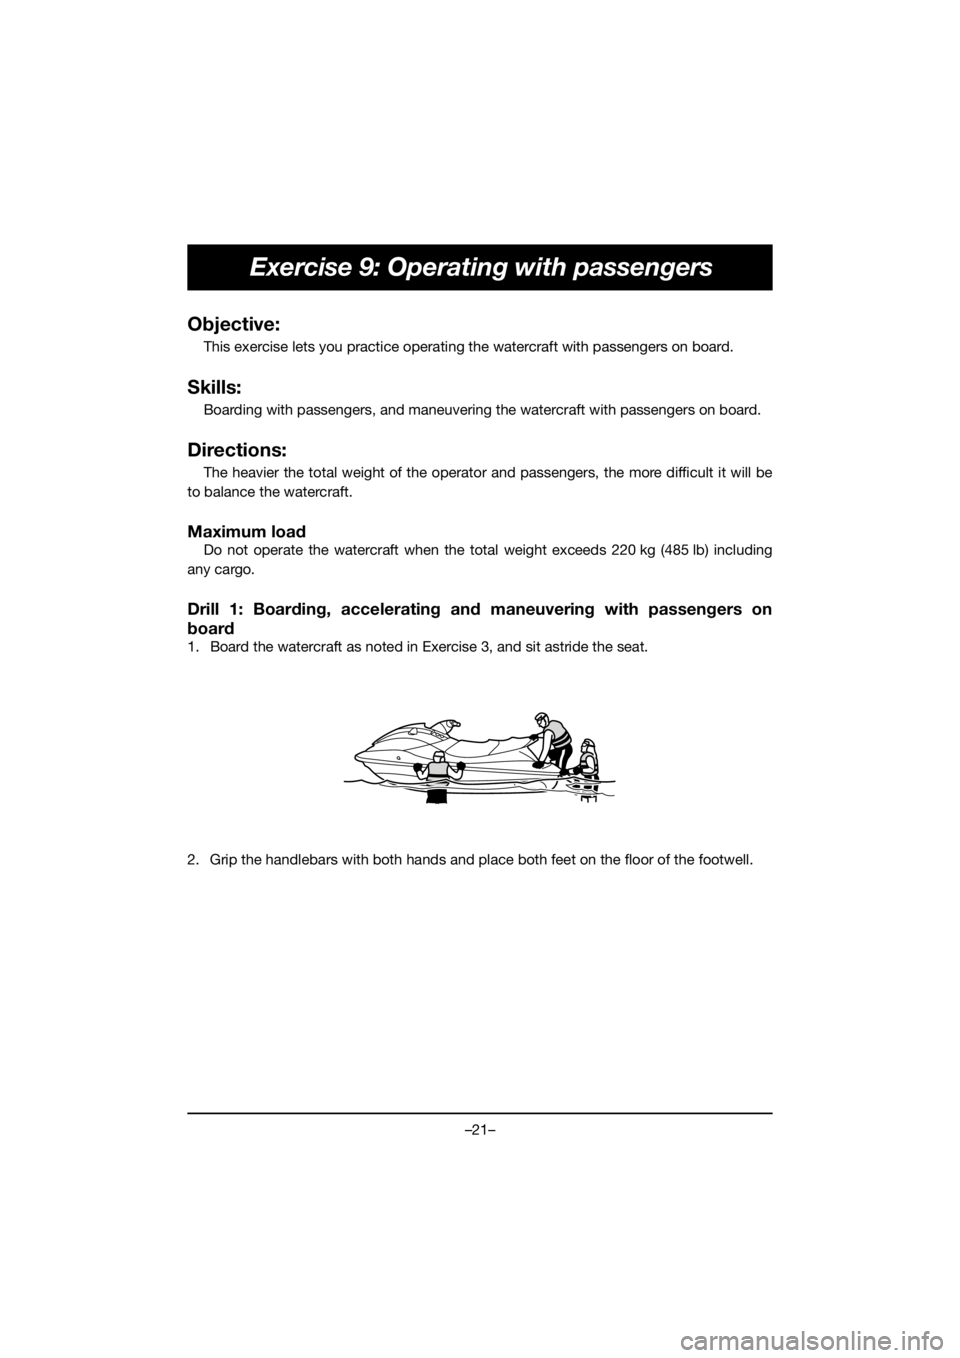 YAMAHA FJR1300 2020  Notices Demploi (in French) –21–
Exercise 9: Operating with passengers
Objective:
This exercise lets you practice operating the watercraft with passengers on board.
Skills:
Boarding with passengers, and maneuvering the water